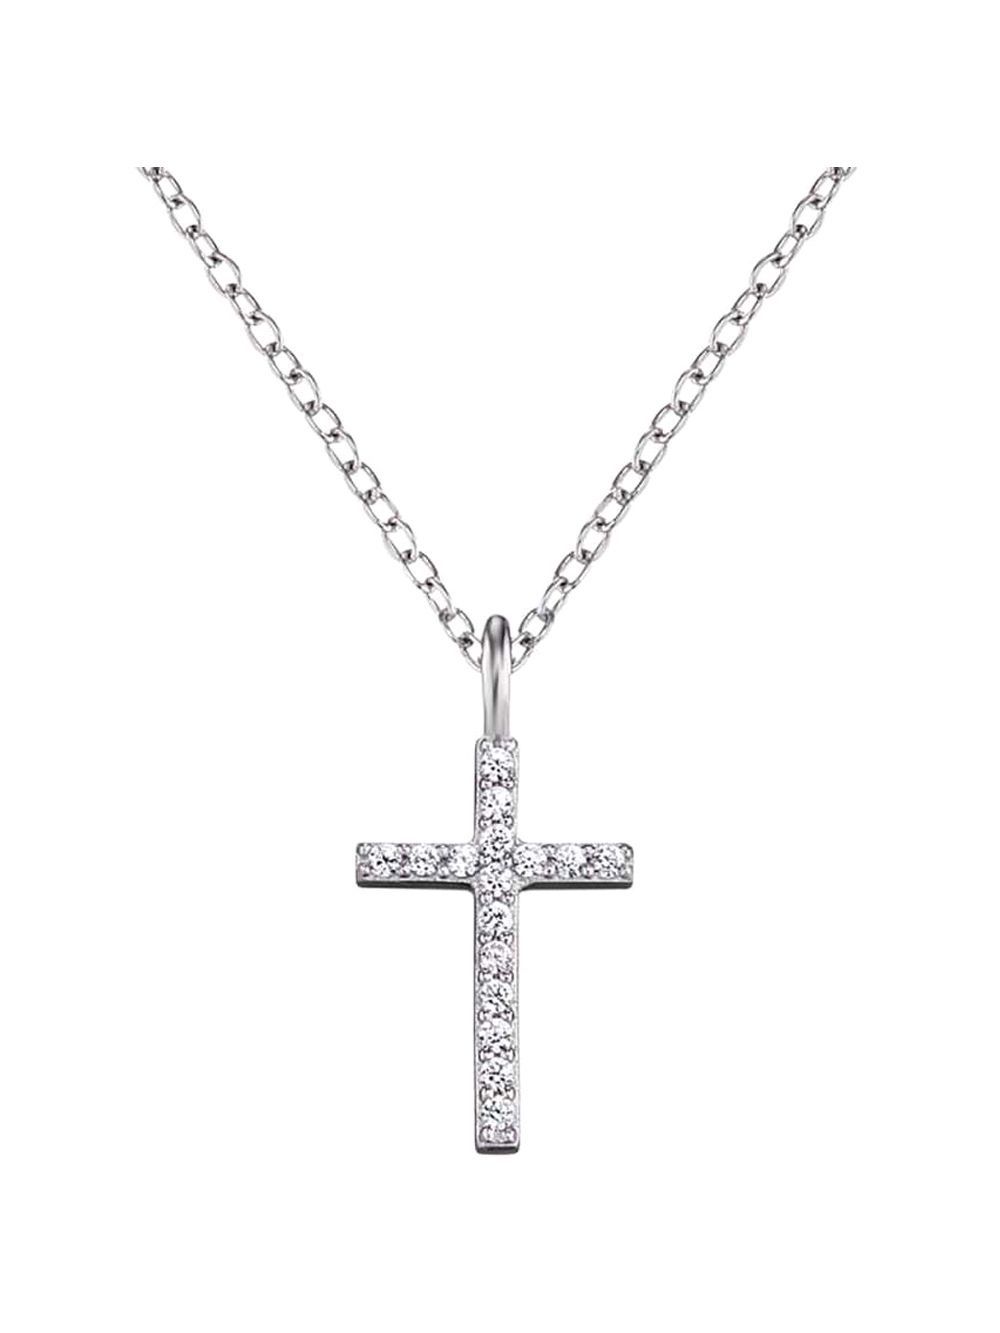 Engelsrufer Ern Lilcross Zi Ladies Cross Pendant Necklace Zirconia Within Best And Newest Sparkling Cross Pendant Necklaces (View 5 of 25)